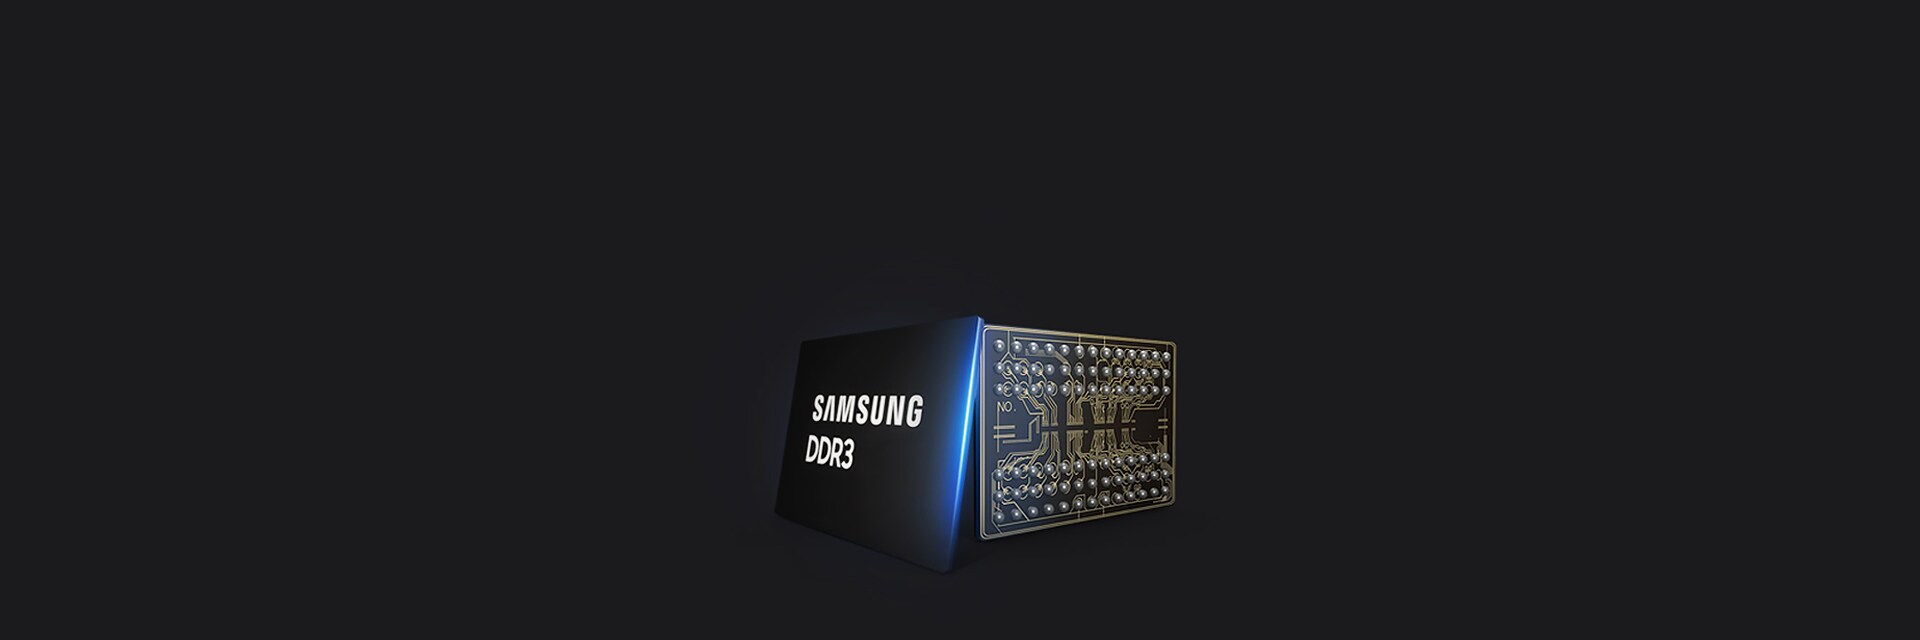 Samsung Semiconductor DRAM DDR3, Most Widely Chosen Memory Product